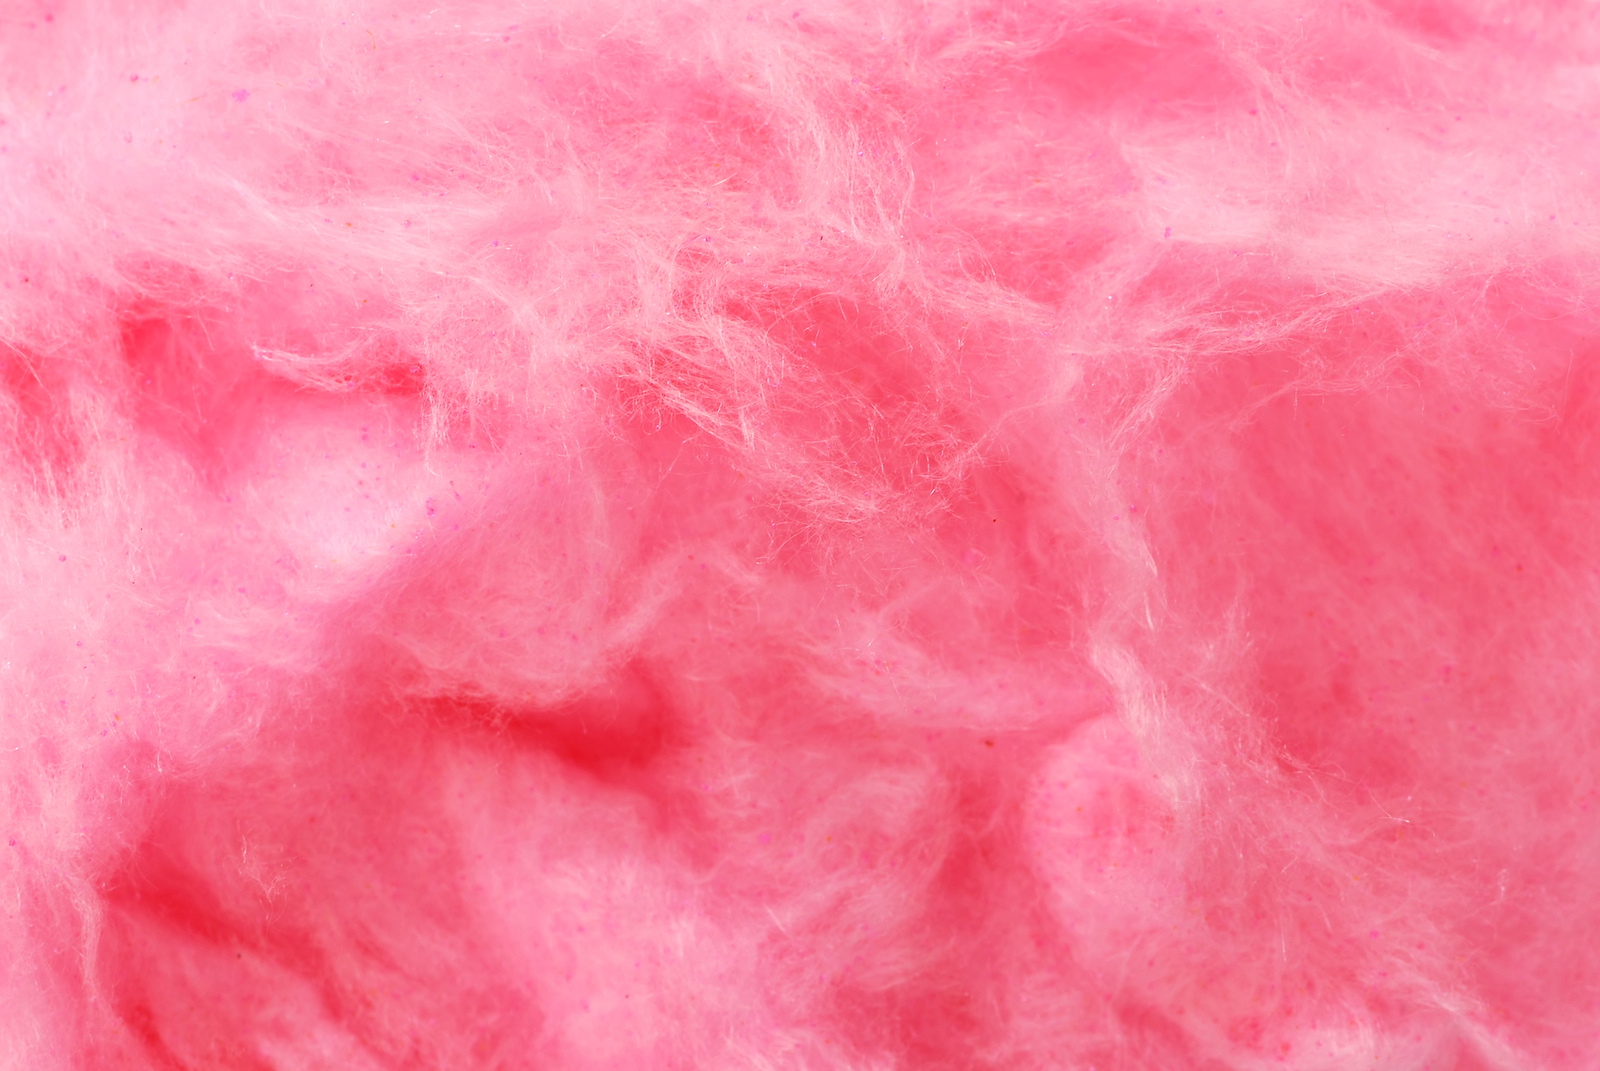 Cotton Candy Wallpapers : [50+] Cute Cotton Candy Wallpaper On ...